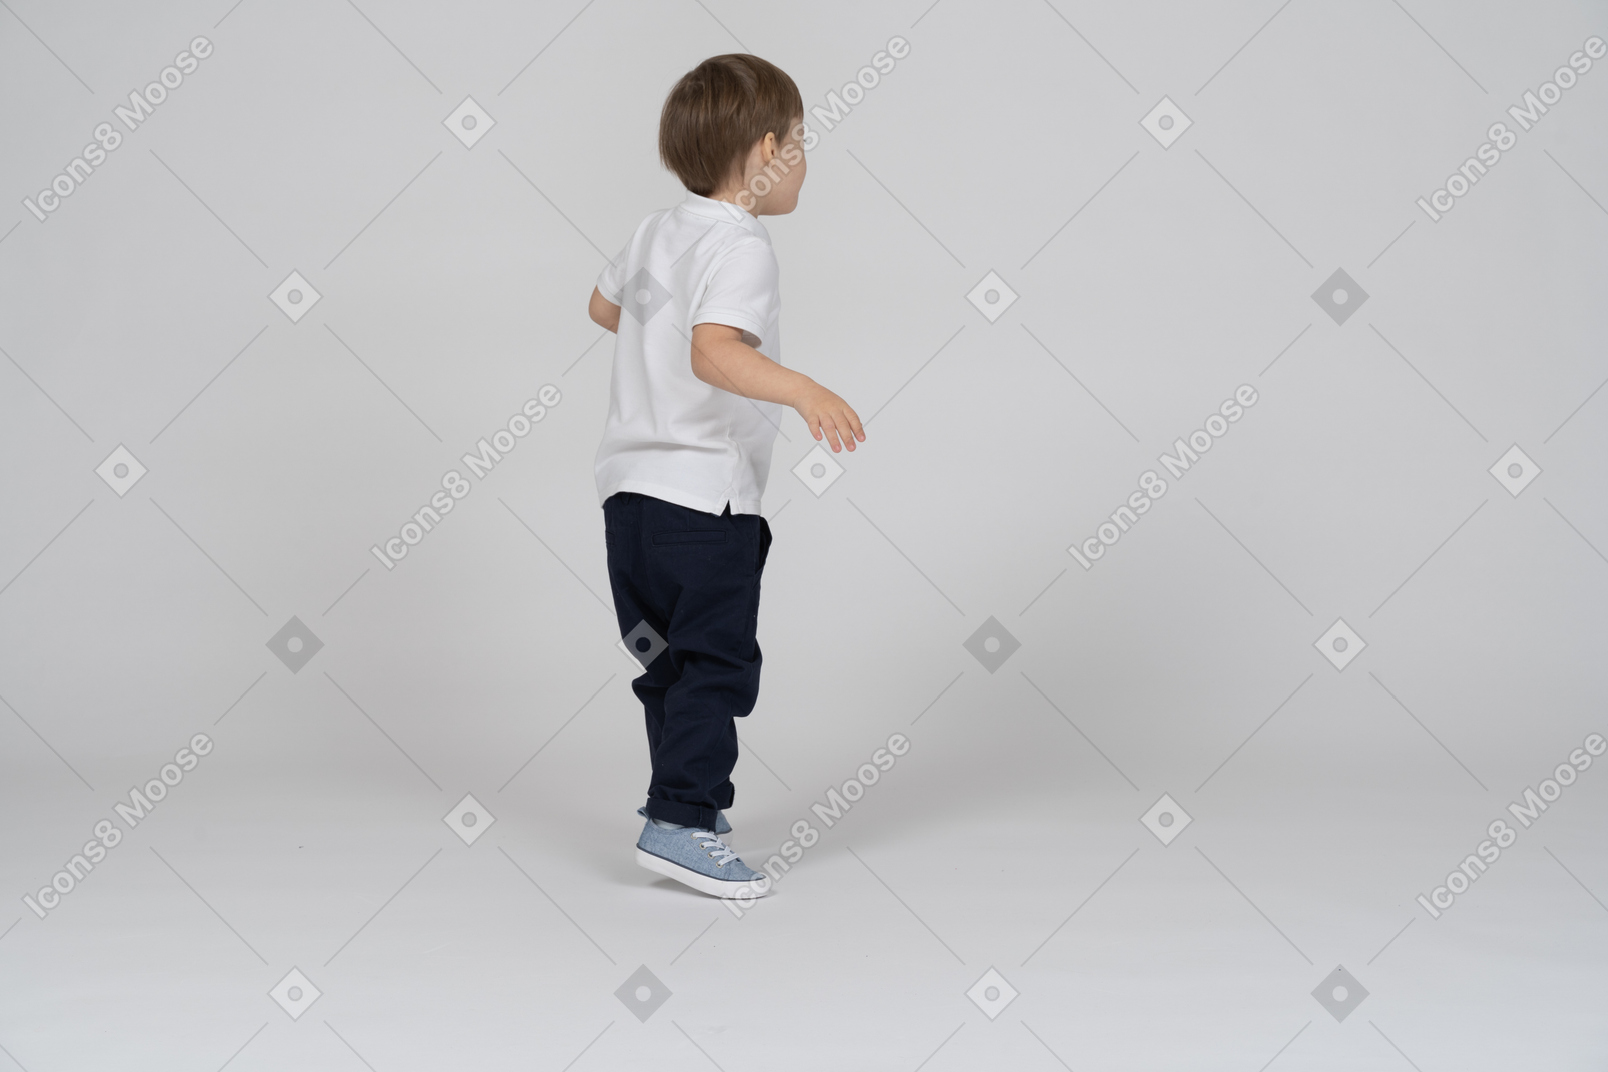 Rear view of a boy standing with his arms bent